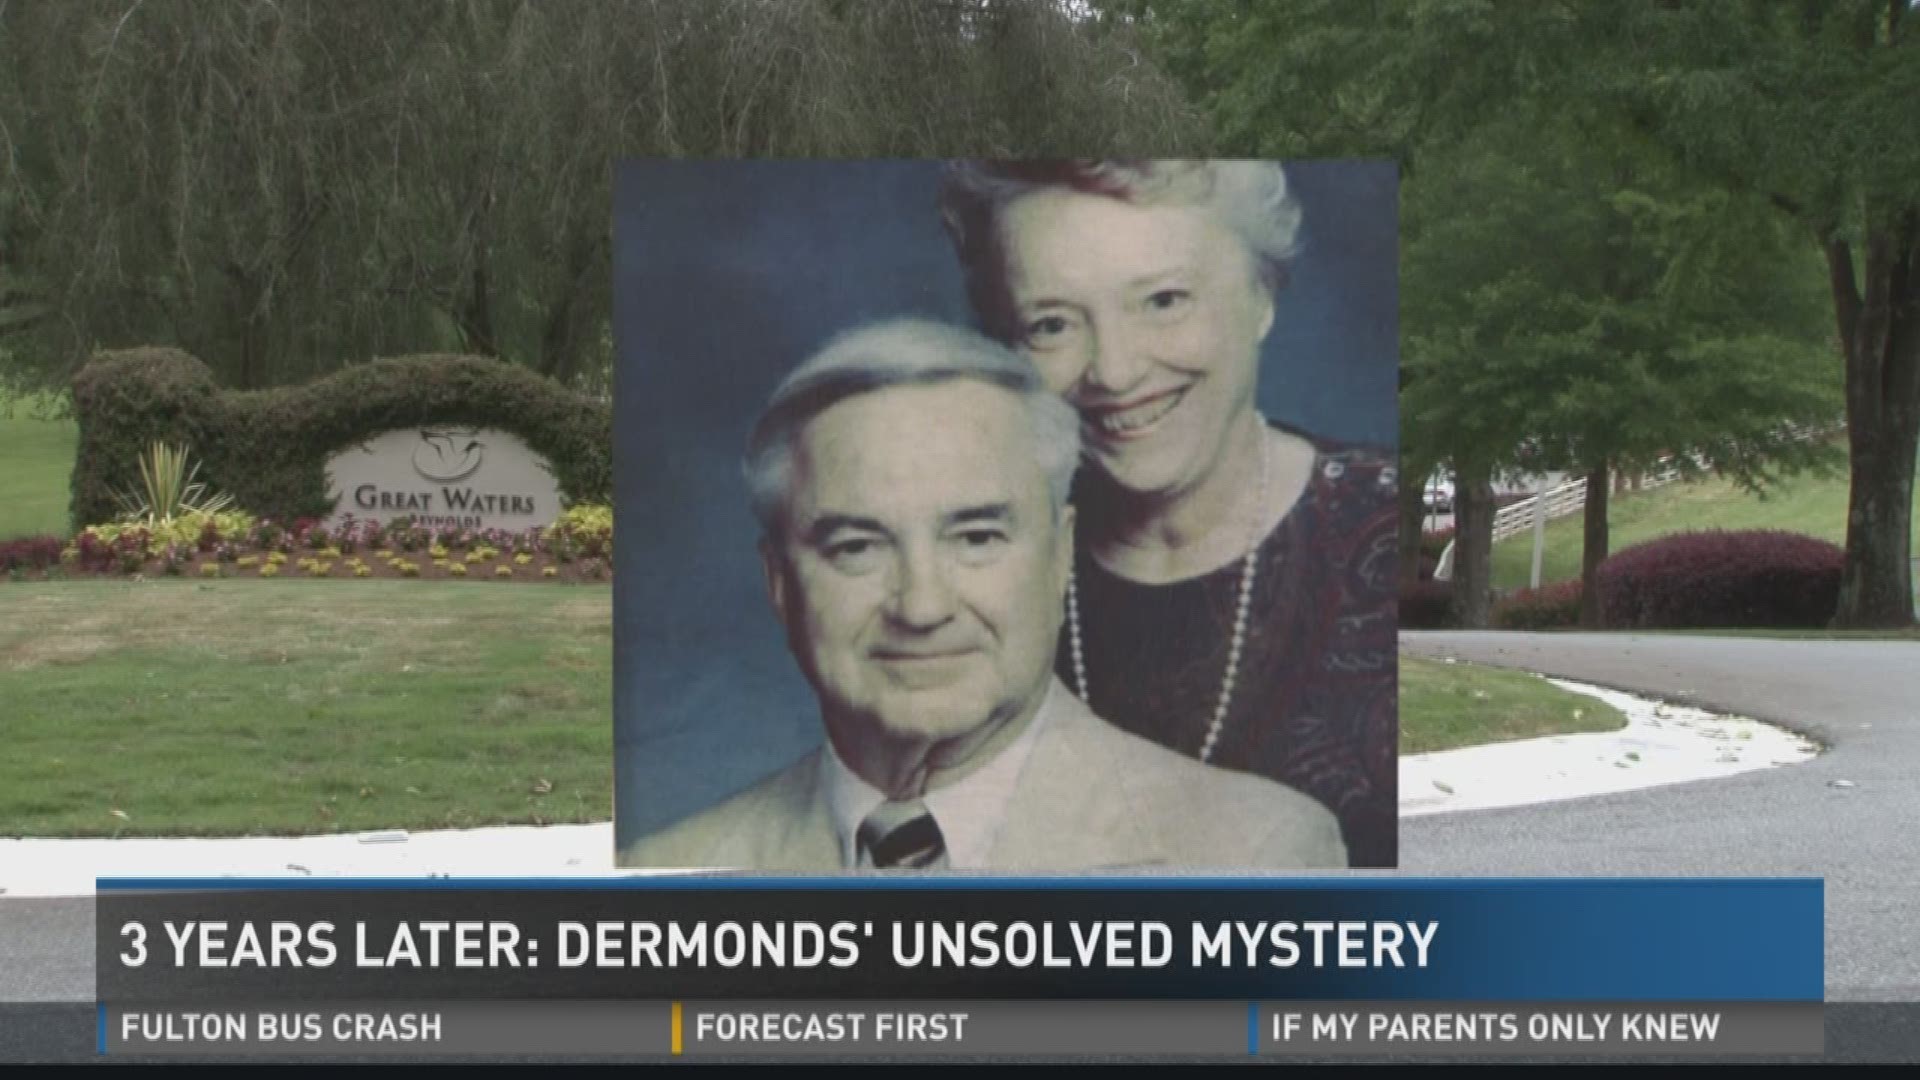 3 years later: Dermonds' unsolved mystery